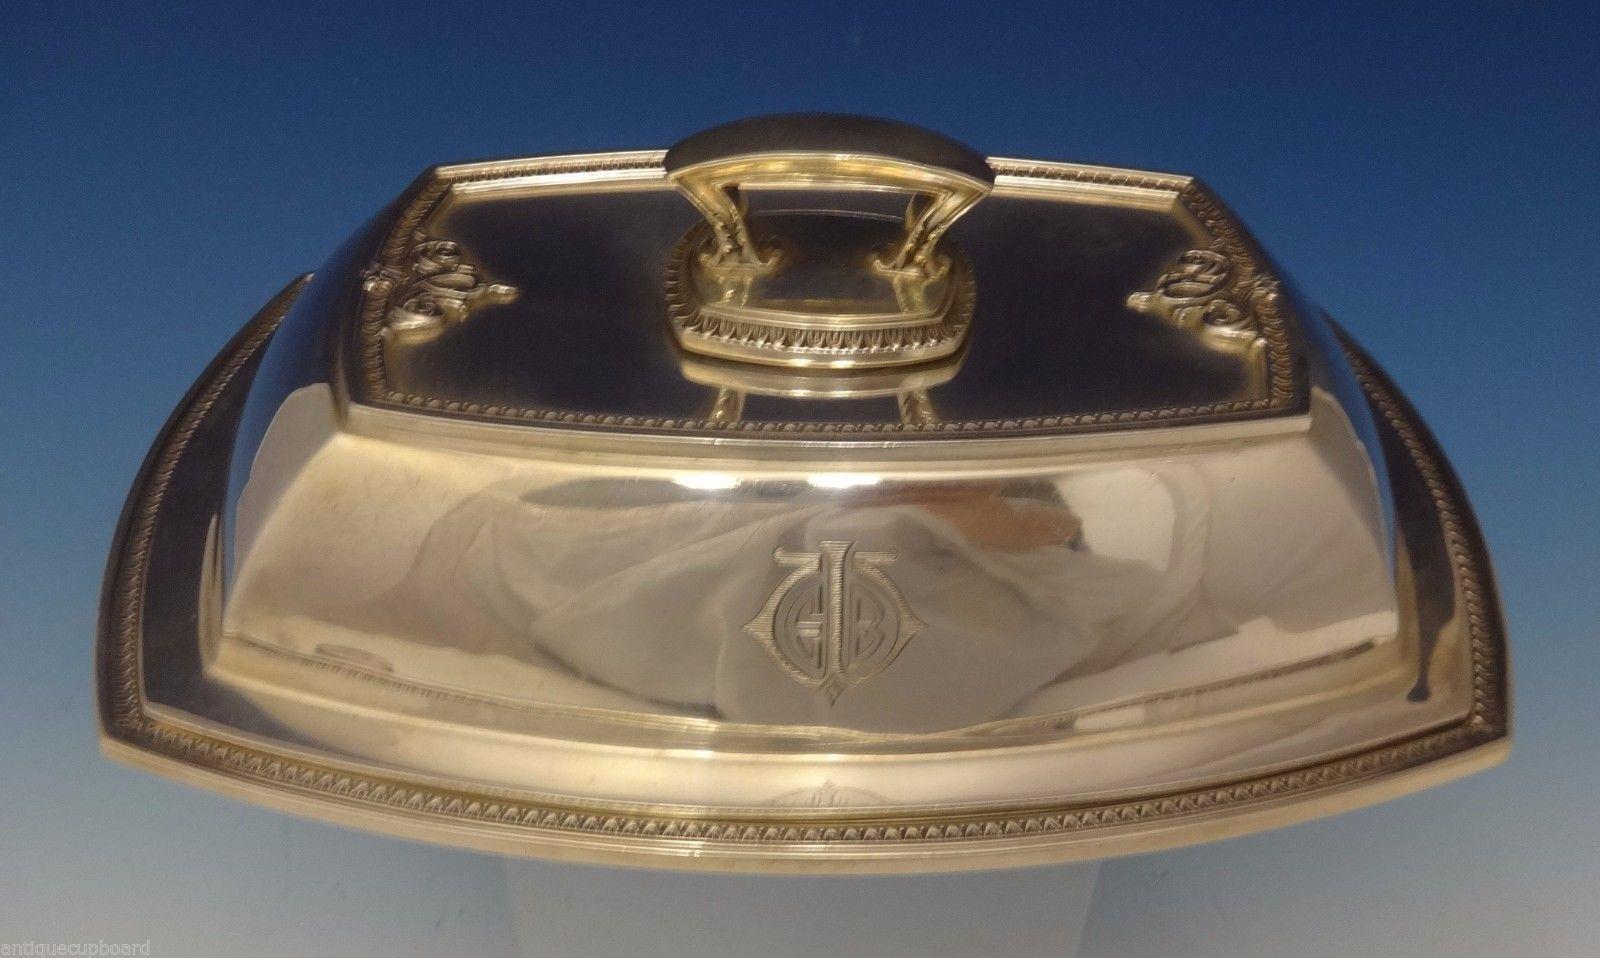 Trianon by International
Art Deco Trianon by International sterling silver covered vegetable dish. It has a removable handle to make two bowls. The piece has an EB monogram and it's marked with #X105-1 and 4. It measures 5 tall with the cover, 9